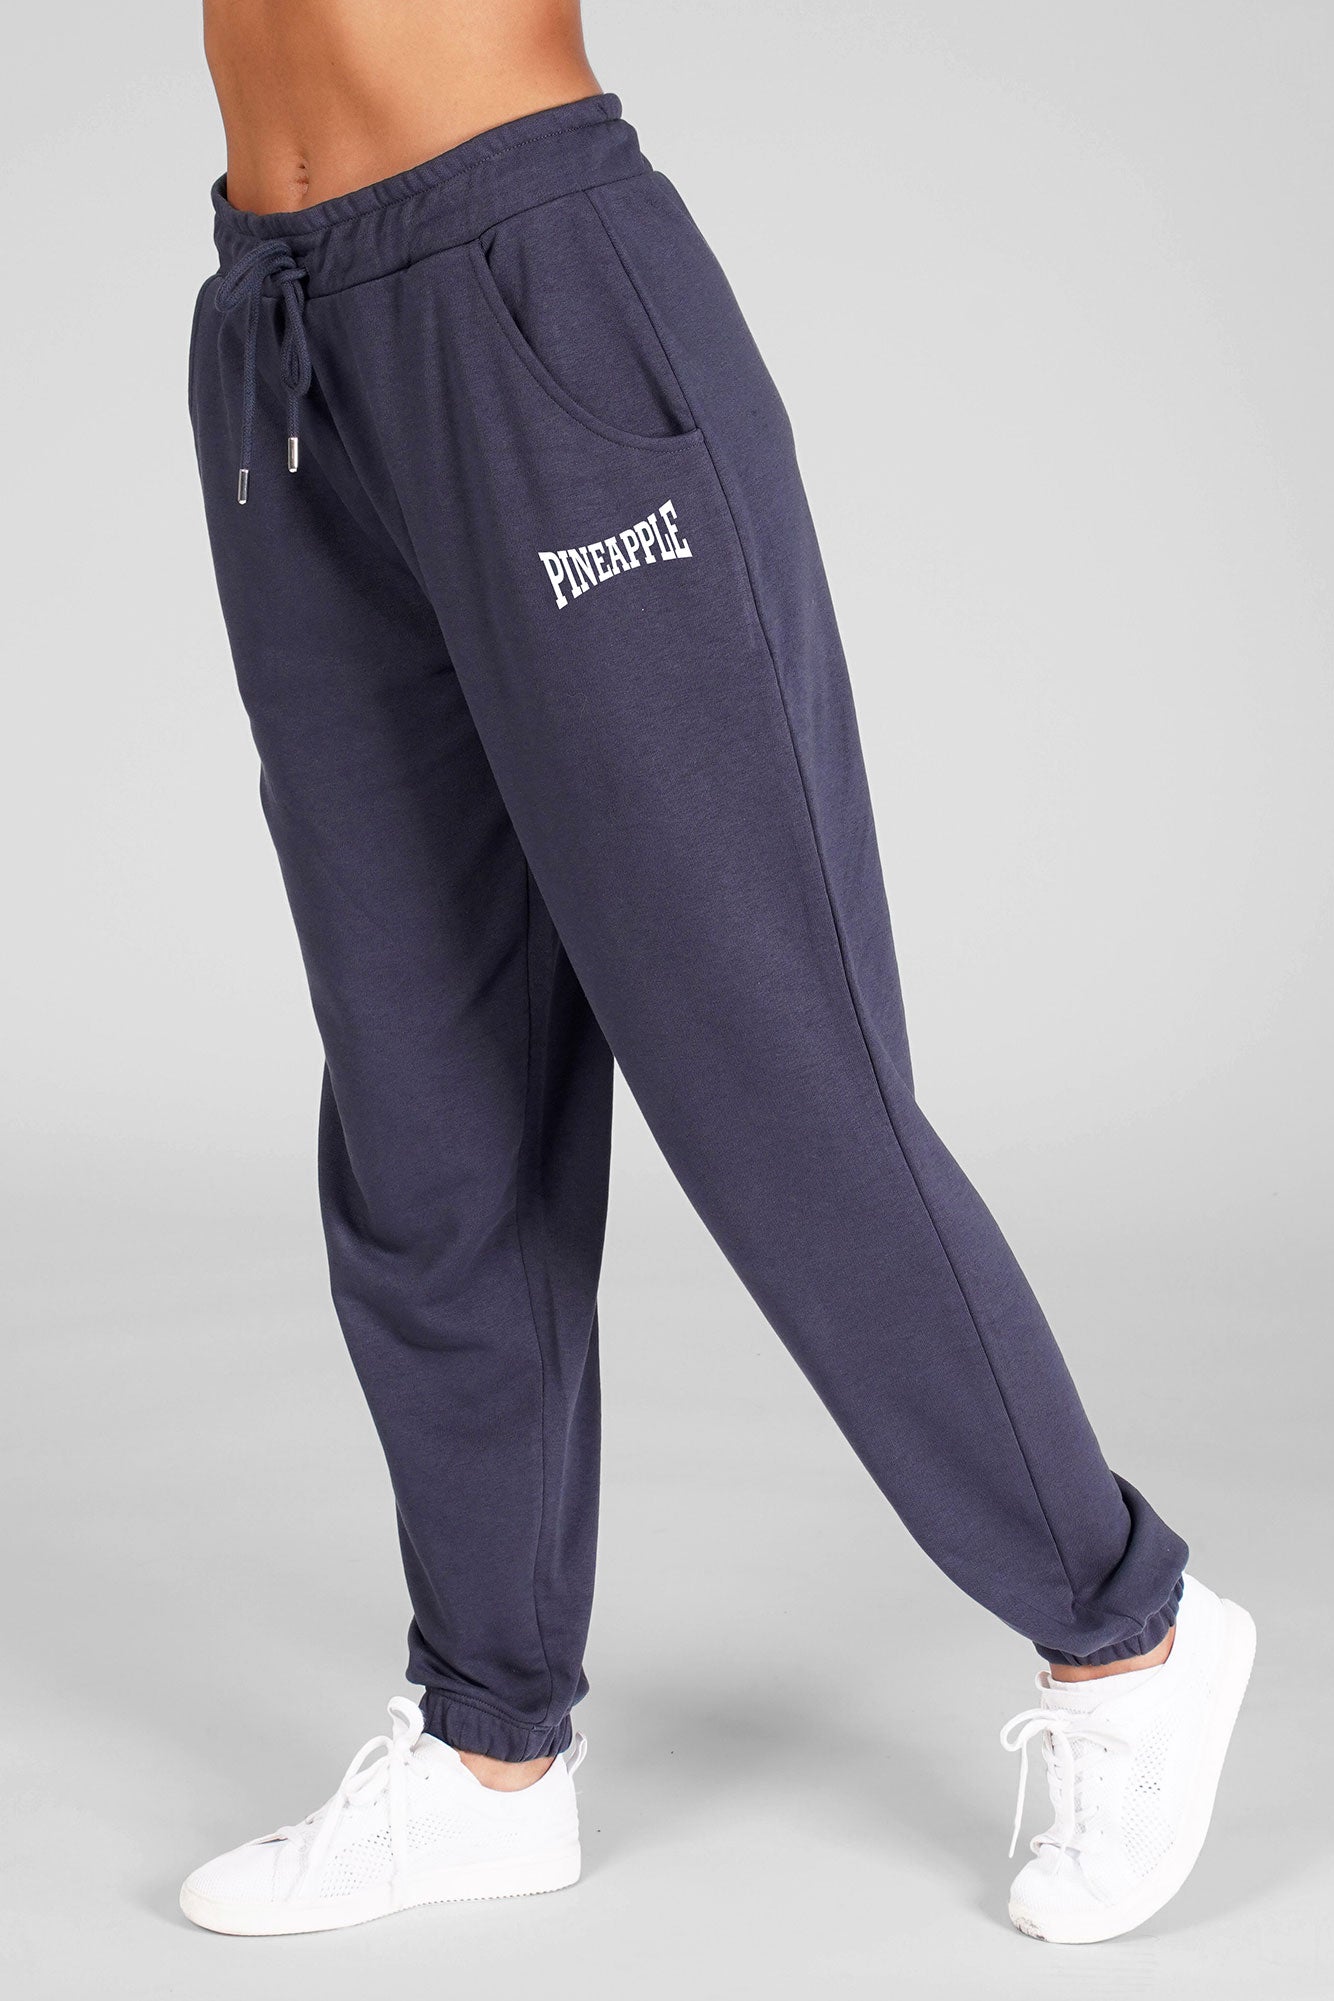 Unisex Charcoal Oversized Joggers with Pockets | Pineapple Leisurewear